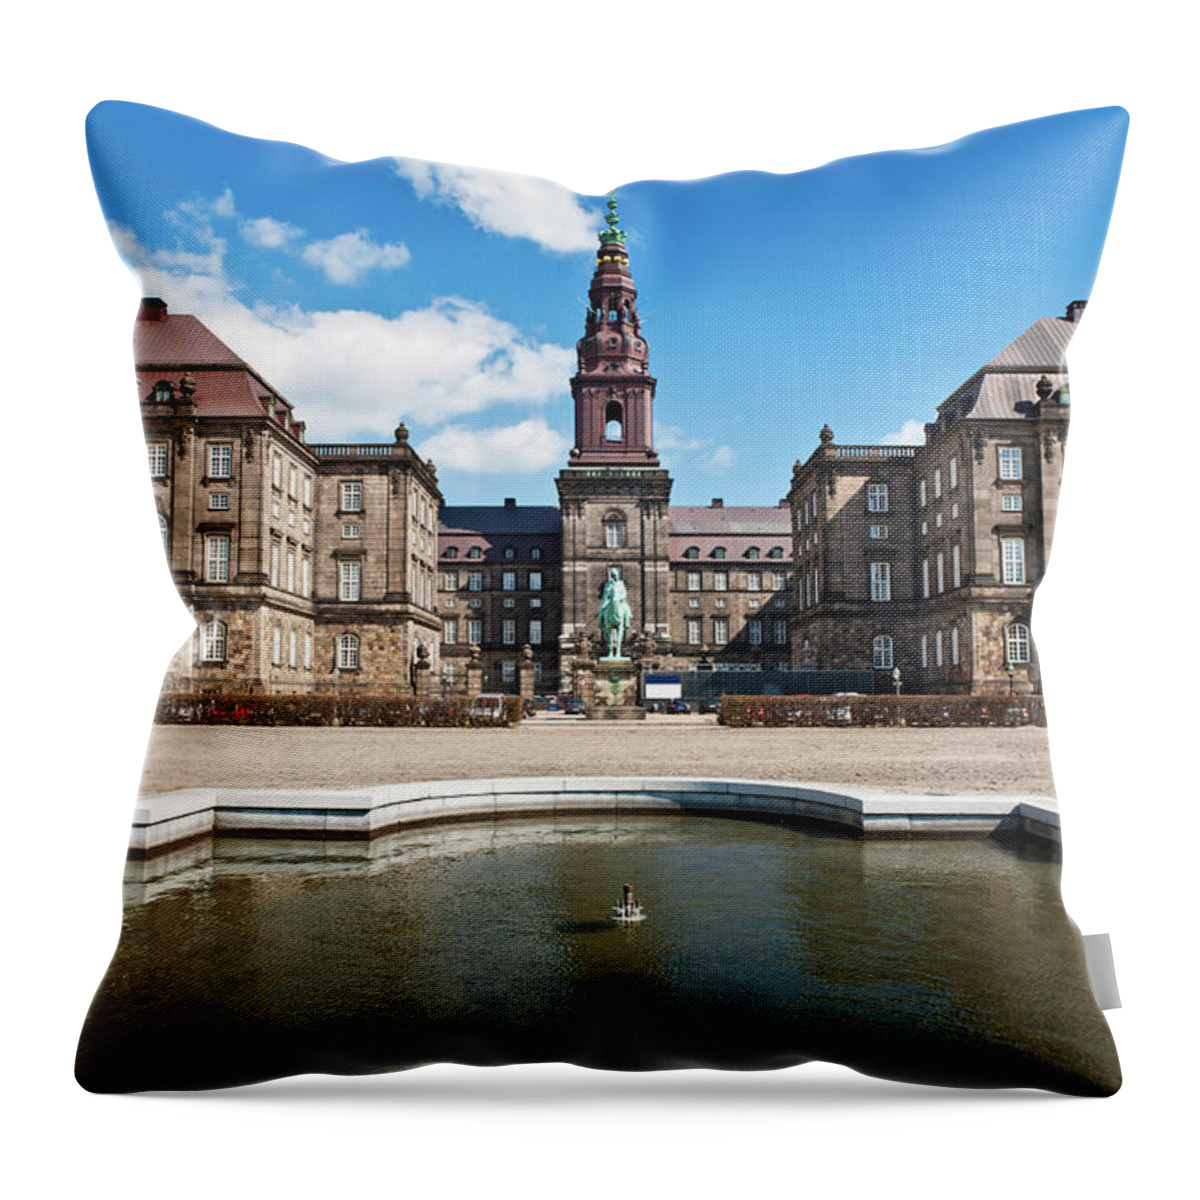 Clock Tower Throw Pillow featuring the photograph Copenhagen Folketing Parliament by Fotovoyager